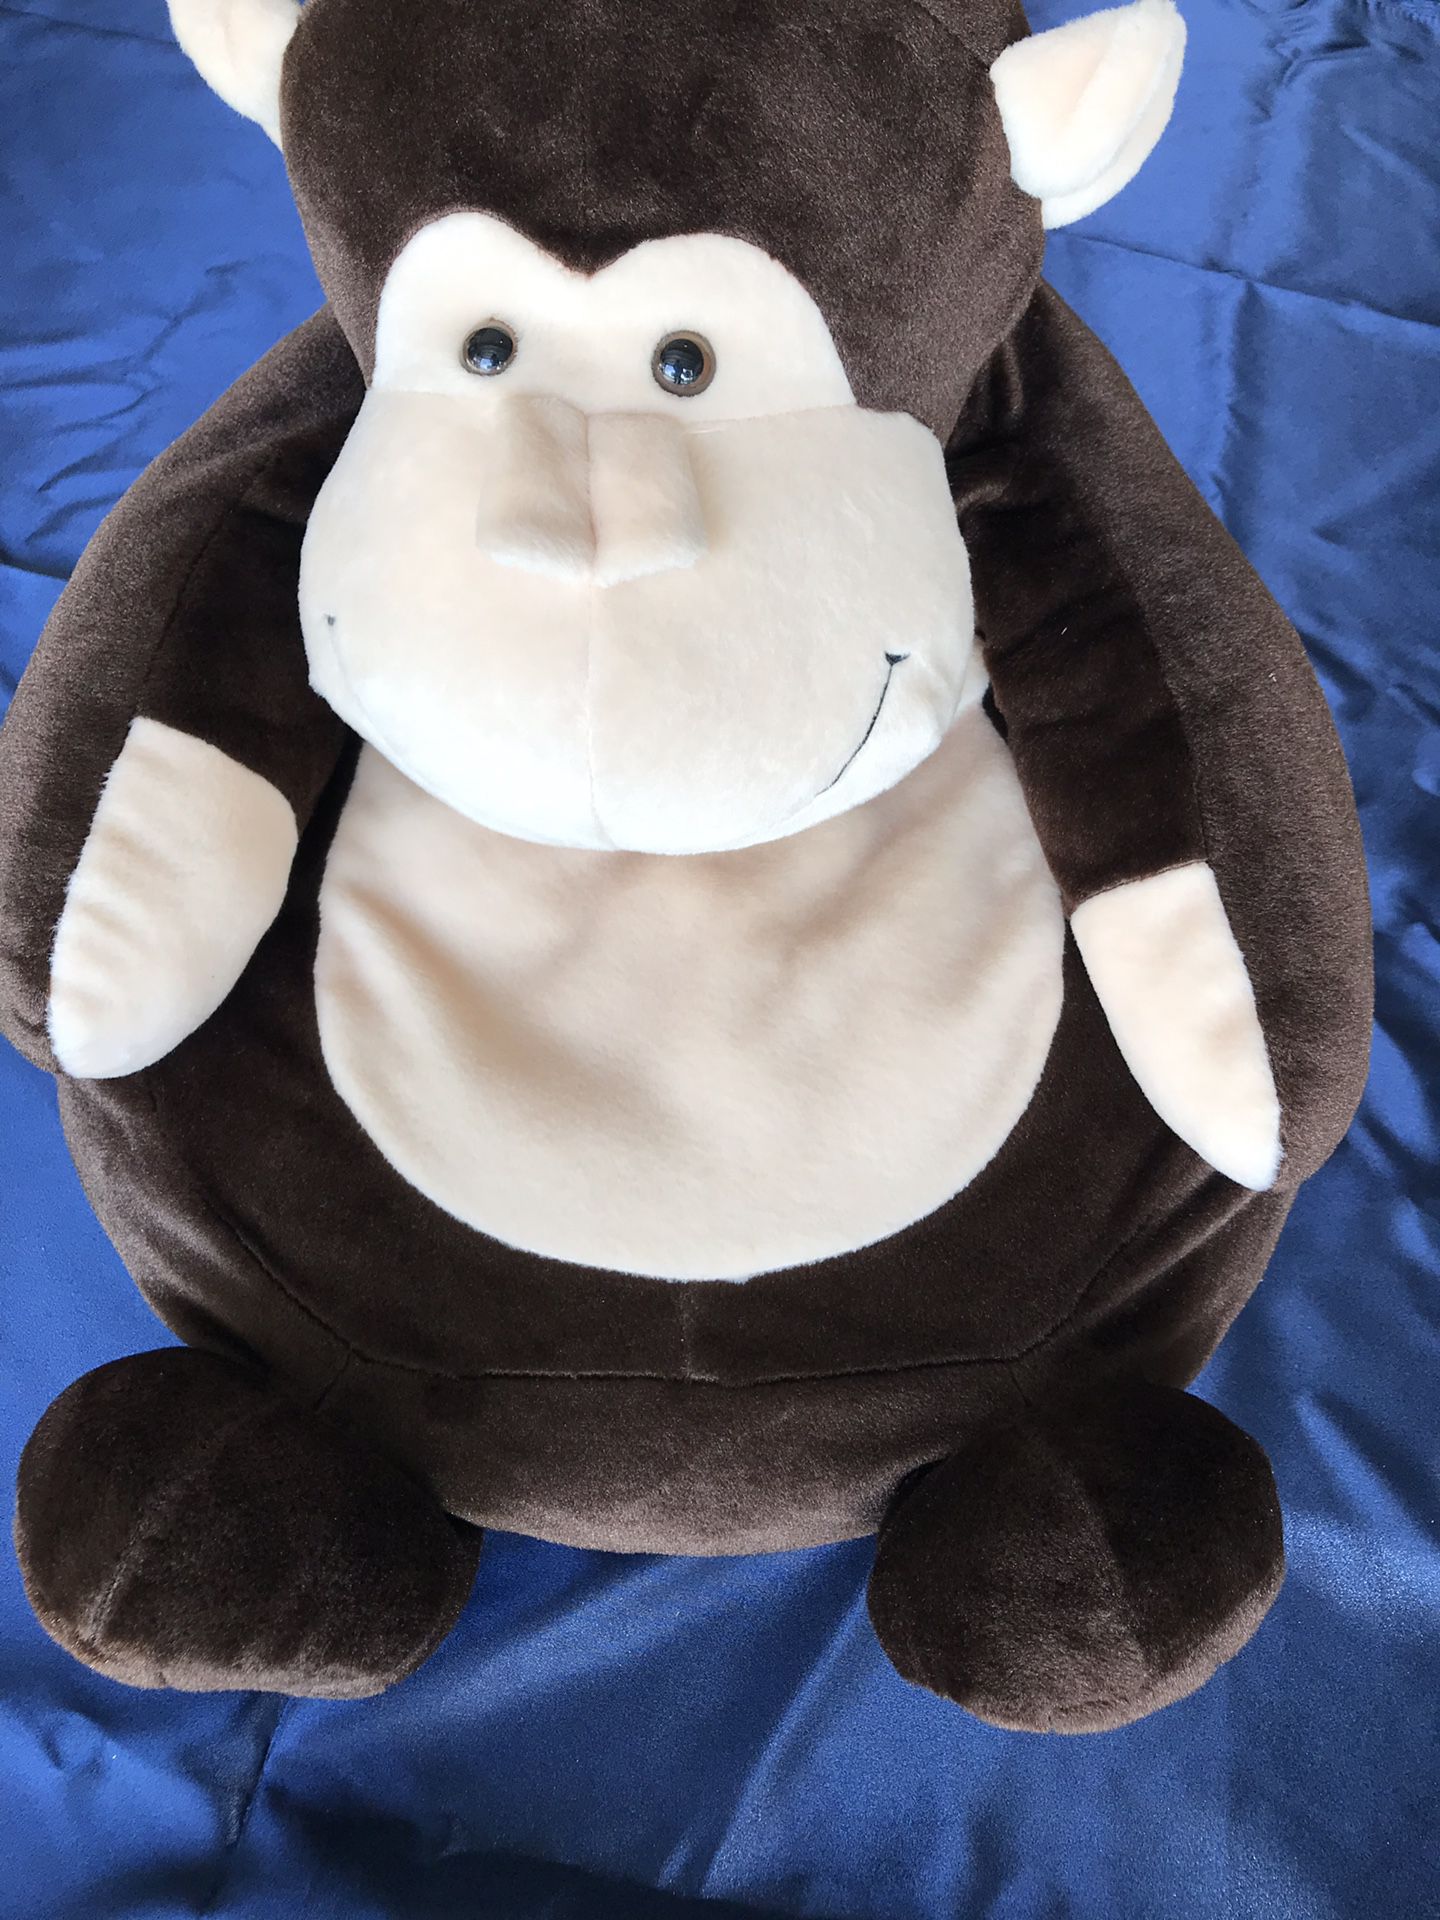 Monkey chair for kids